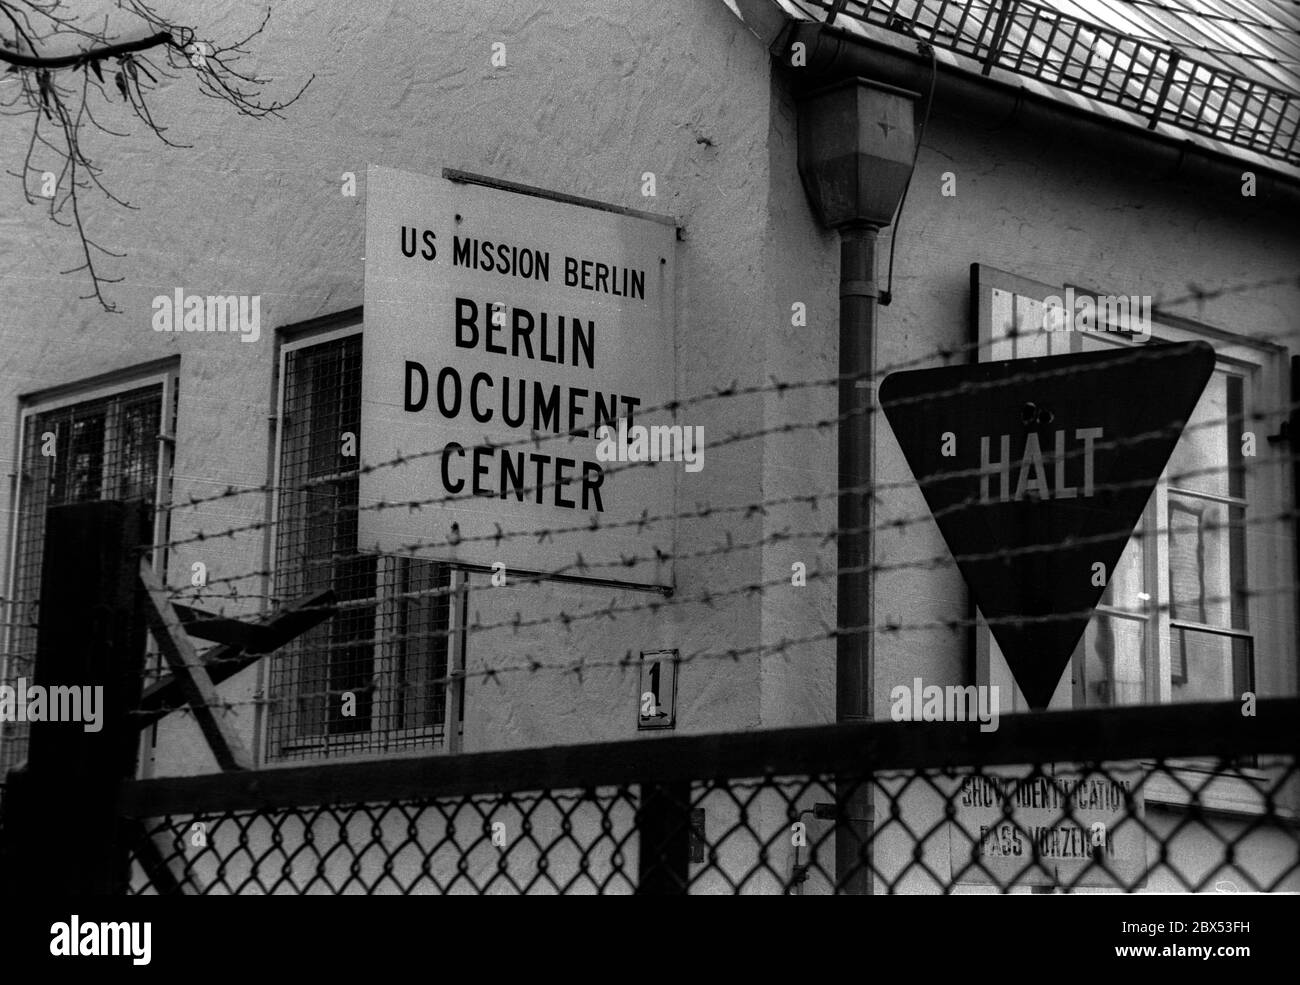 Berlin-Bezirke / Status / 8 / 1988 Berlin Document Center, an archive of the Americans in Zehlendorf. Many files of the SS and the Wehrmacht were kept there. Only a few had access. After reunification, the files were handed over to the Federal Archive. // Western Allies / Military /USA [automated translation] Stock Photo